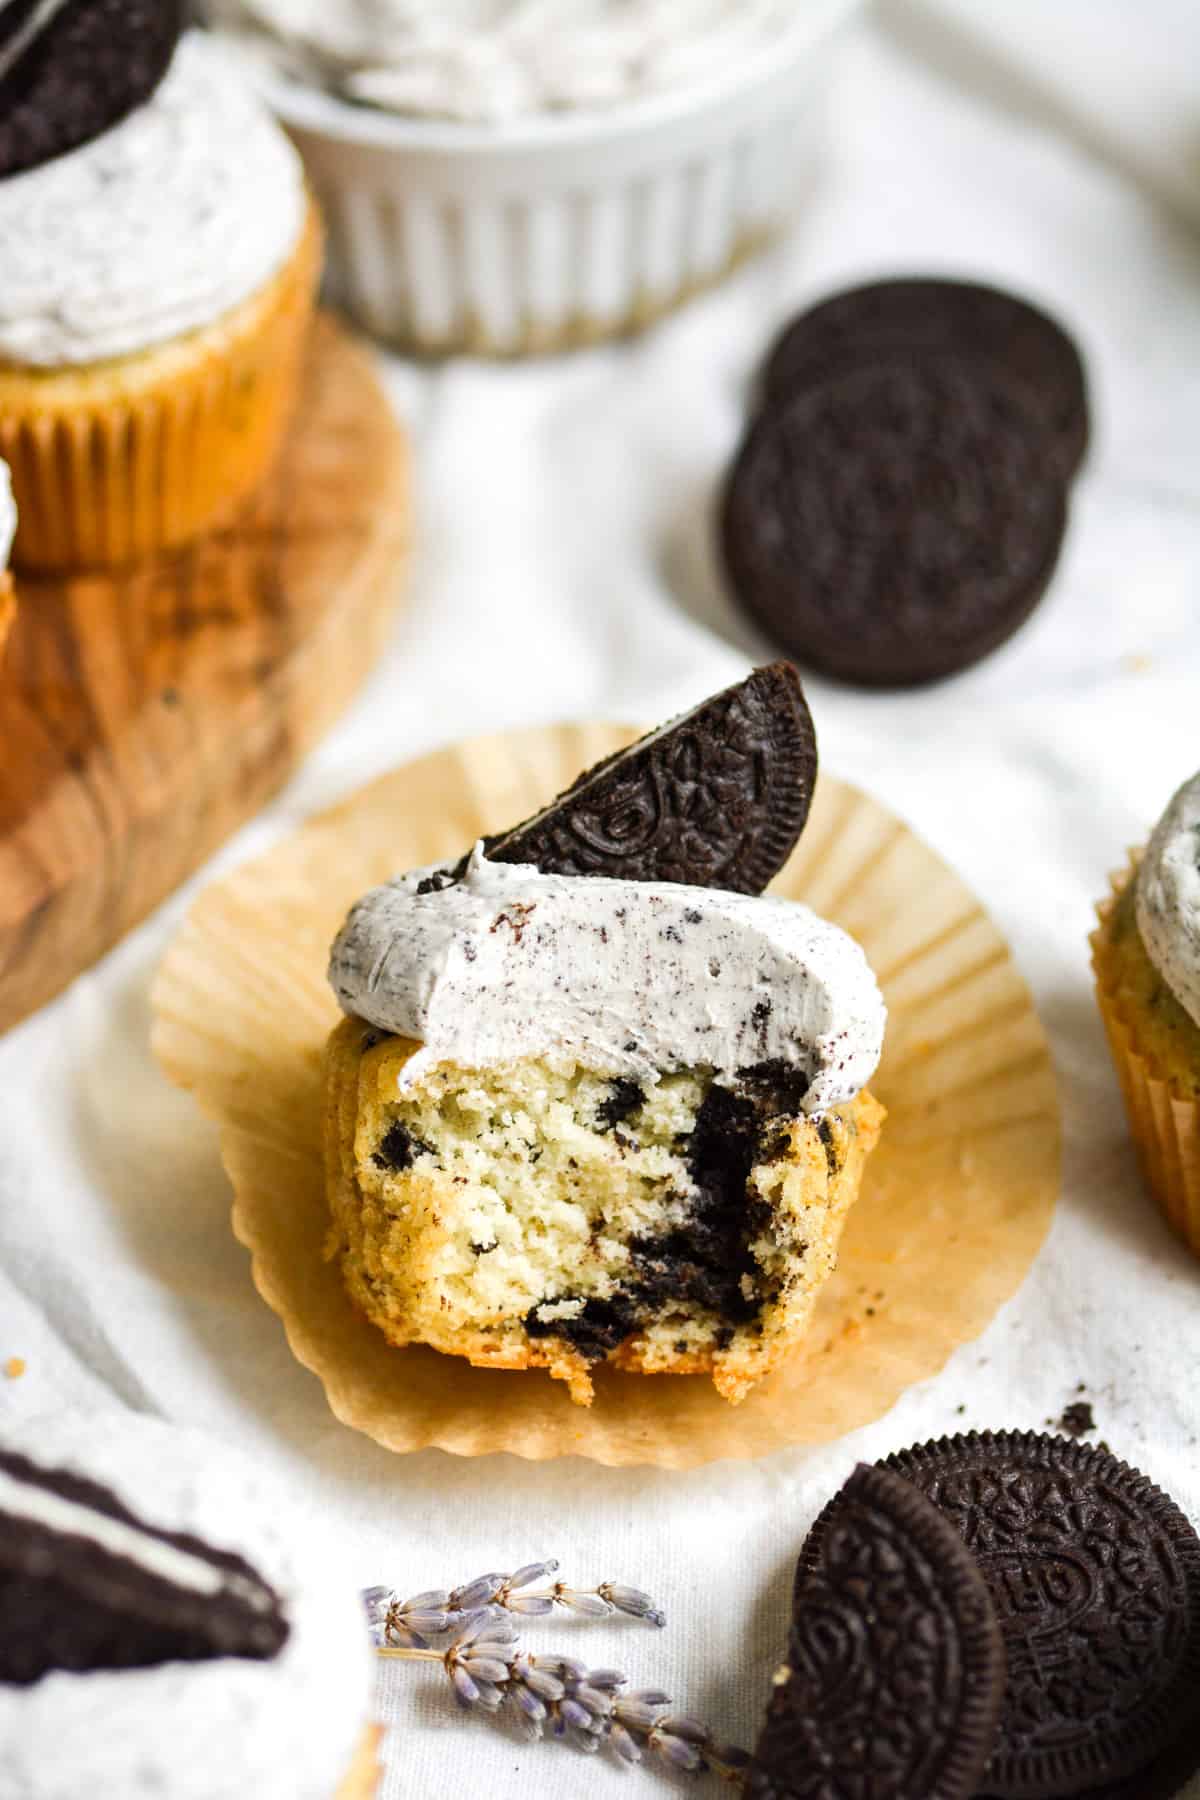 A Vegan Oreo Cupcake with a bite taken out of it on its wrapper.